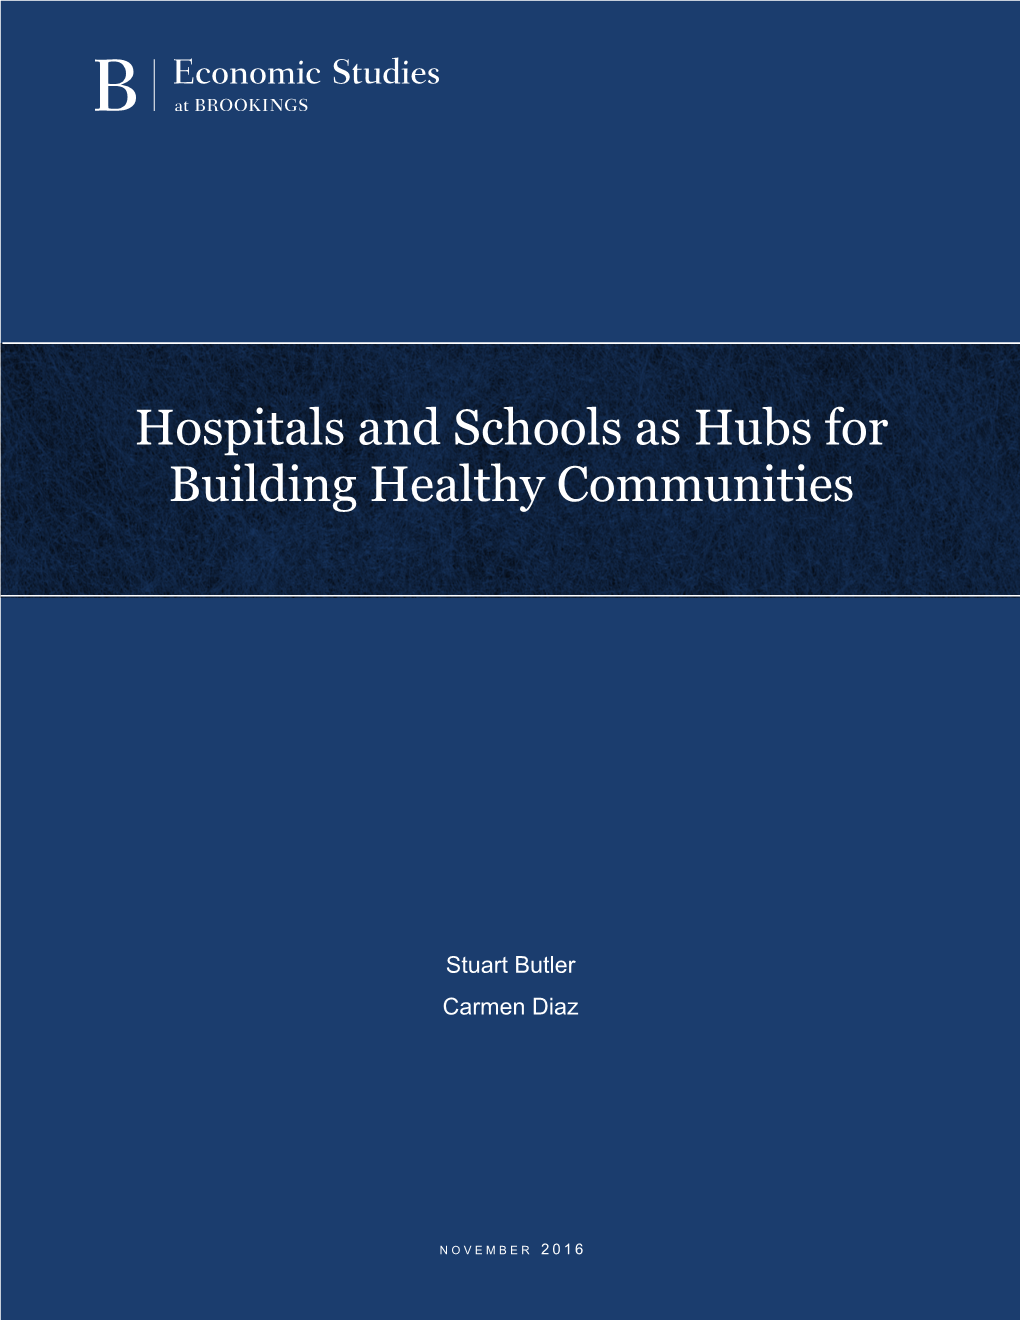 Hospitals and Schools As Hubs for Building Healthy Communities